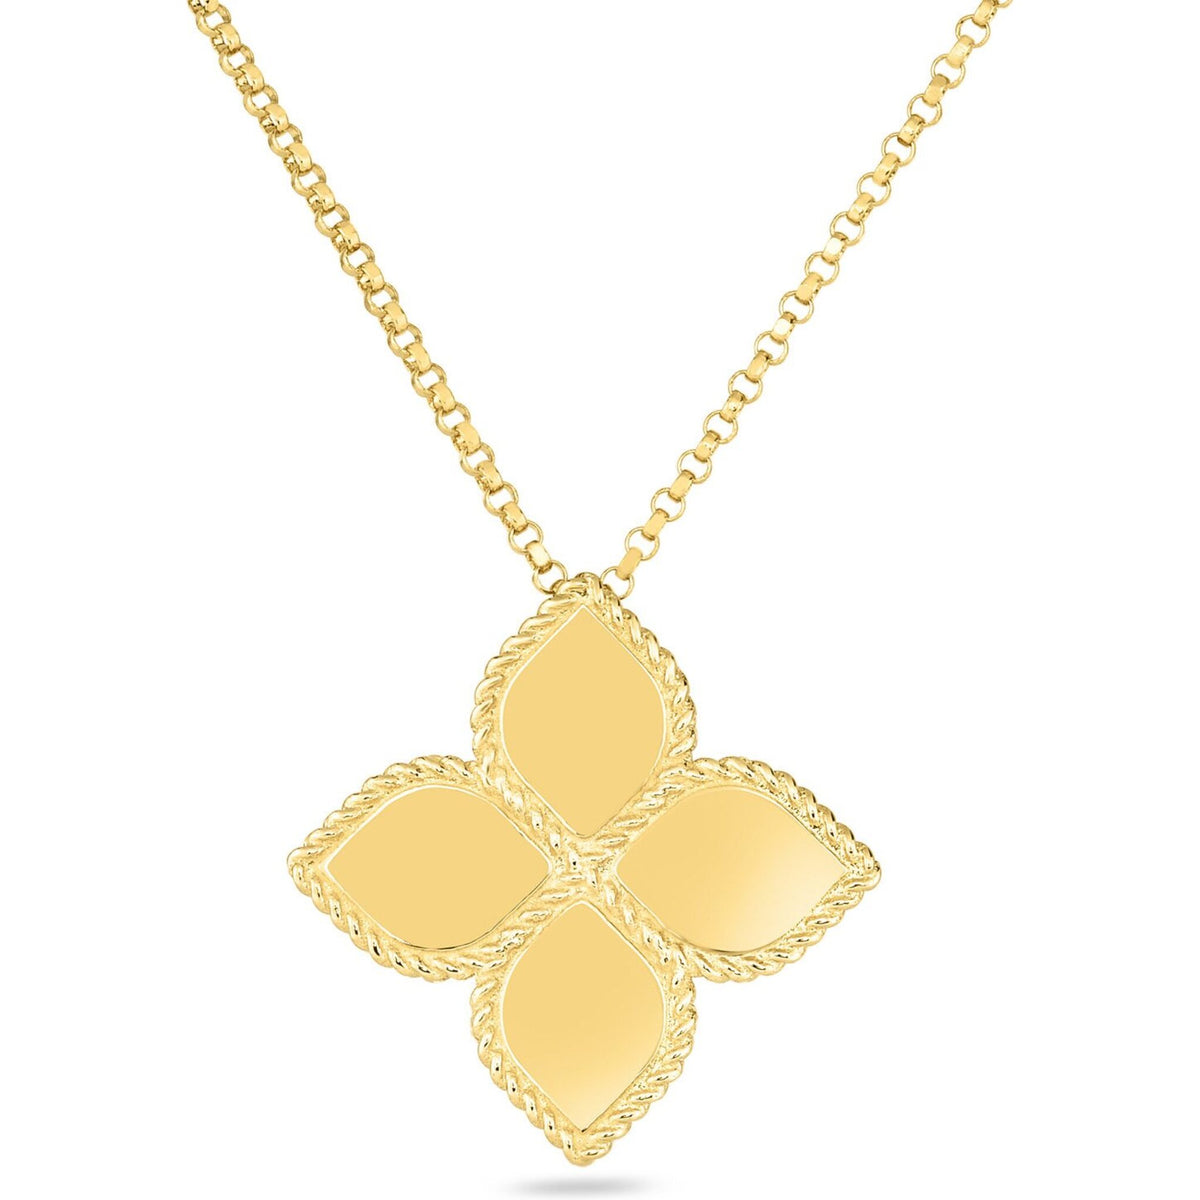 Roberto Coin - Princess Flower Pendant Necklace in 18K Yellow Gold